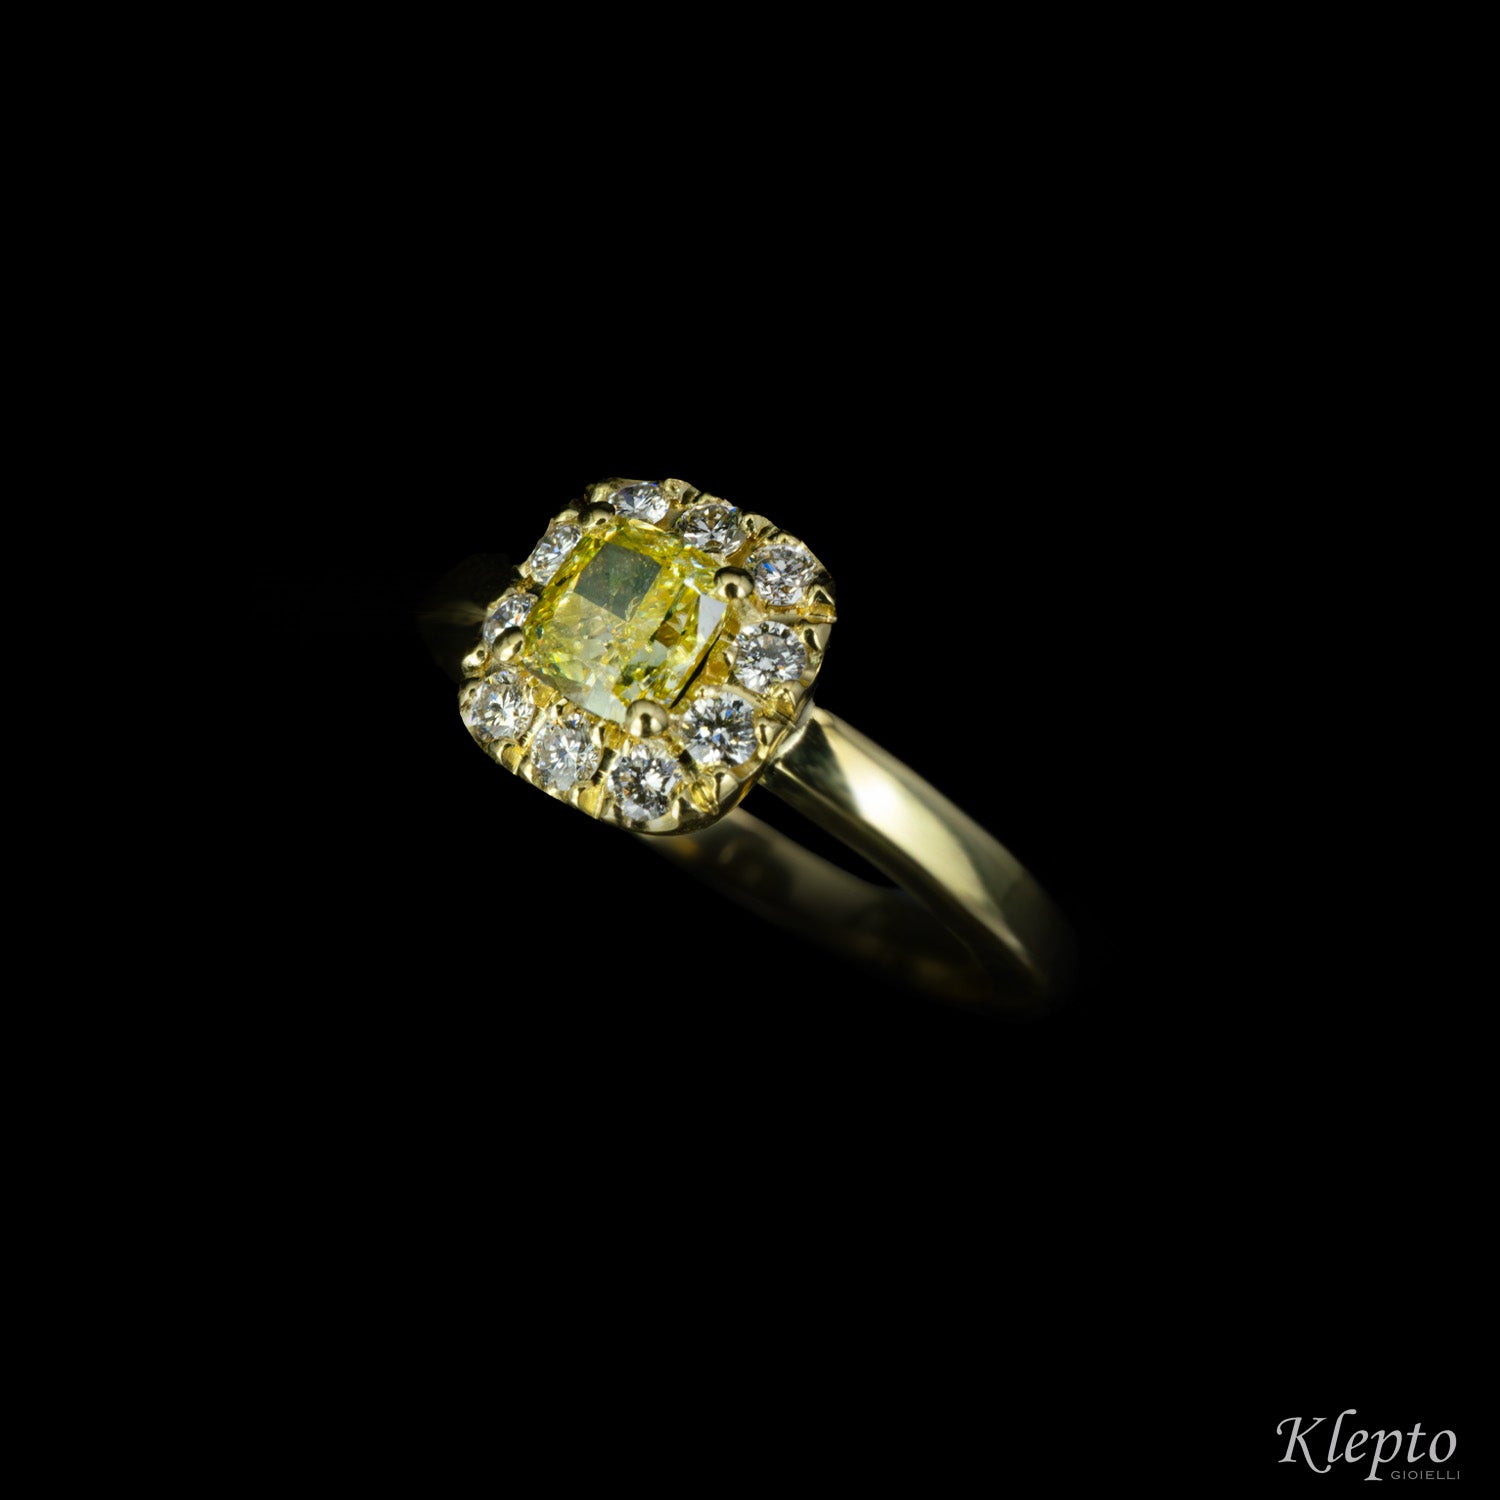 Classic ring in yellow gold with Fancy yellow diamond and outline of Diamonds